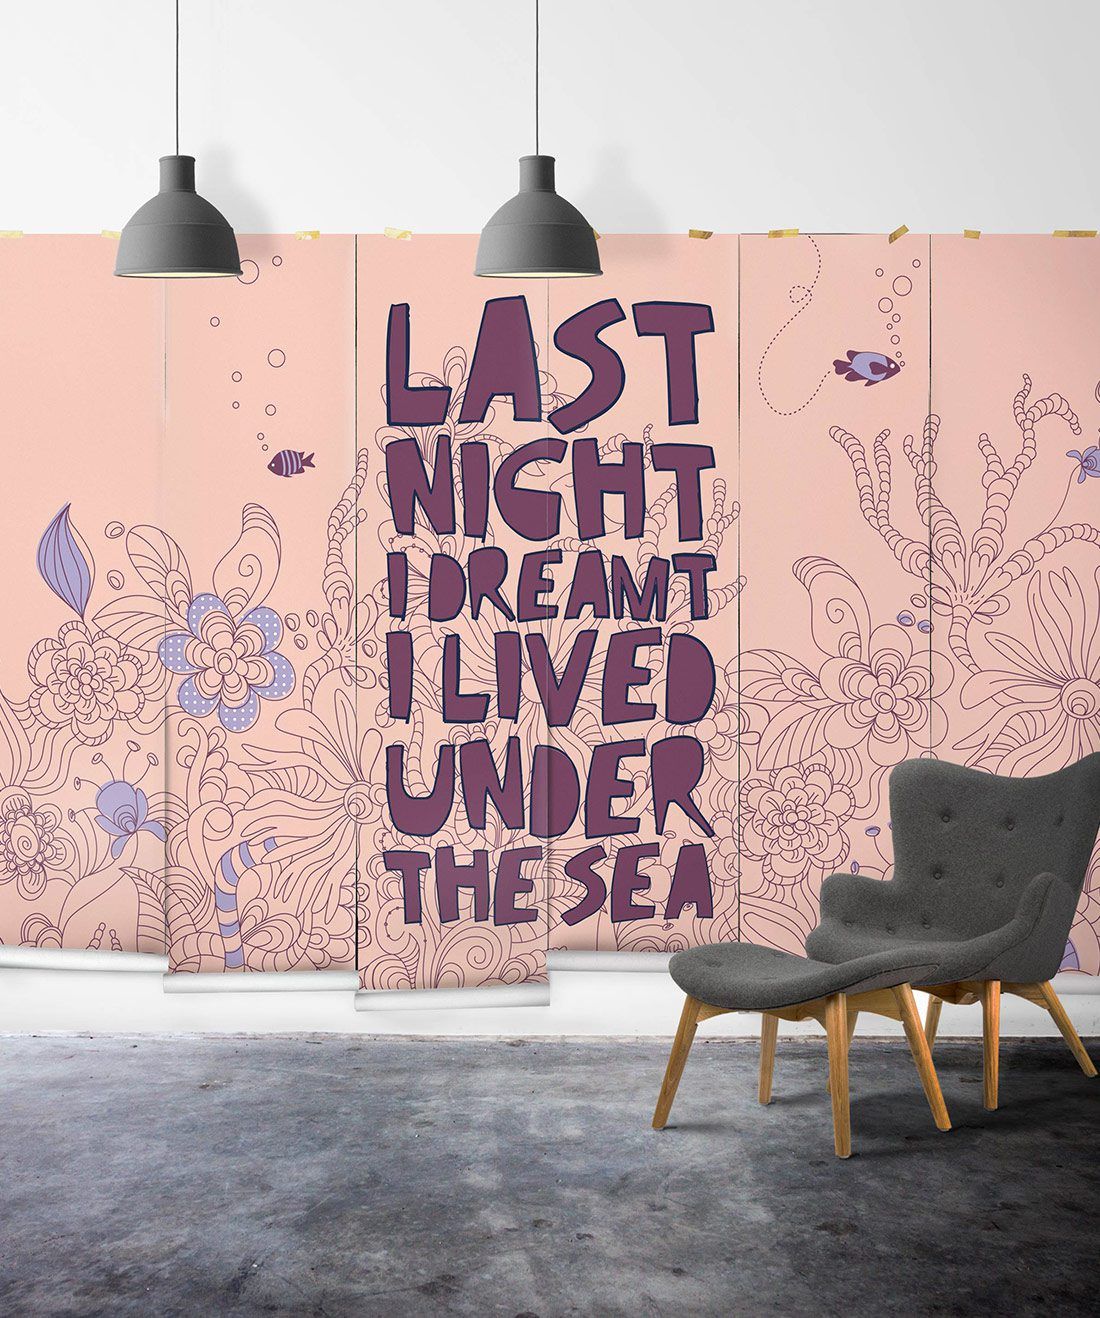 Under The Sea is a pink & purple wall mural